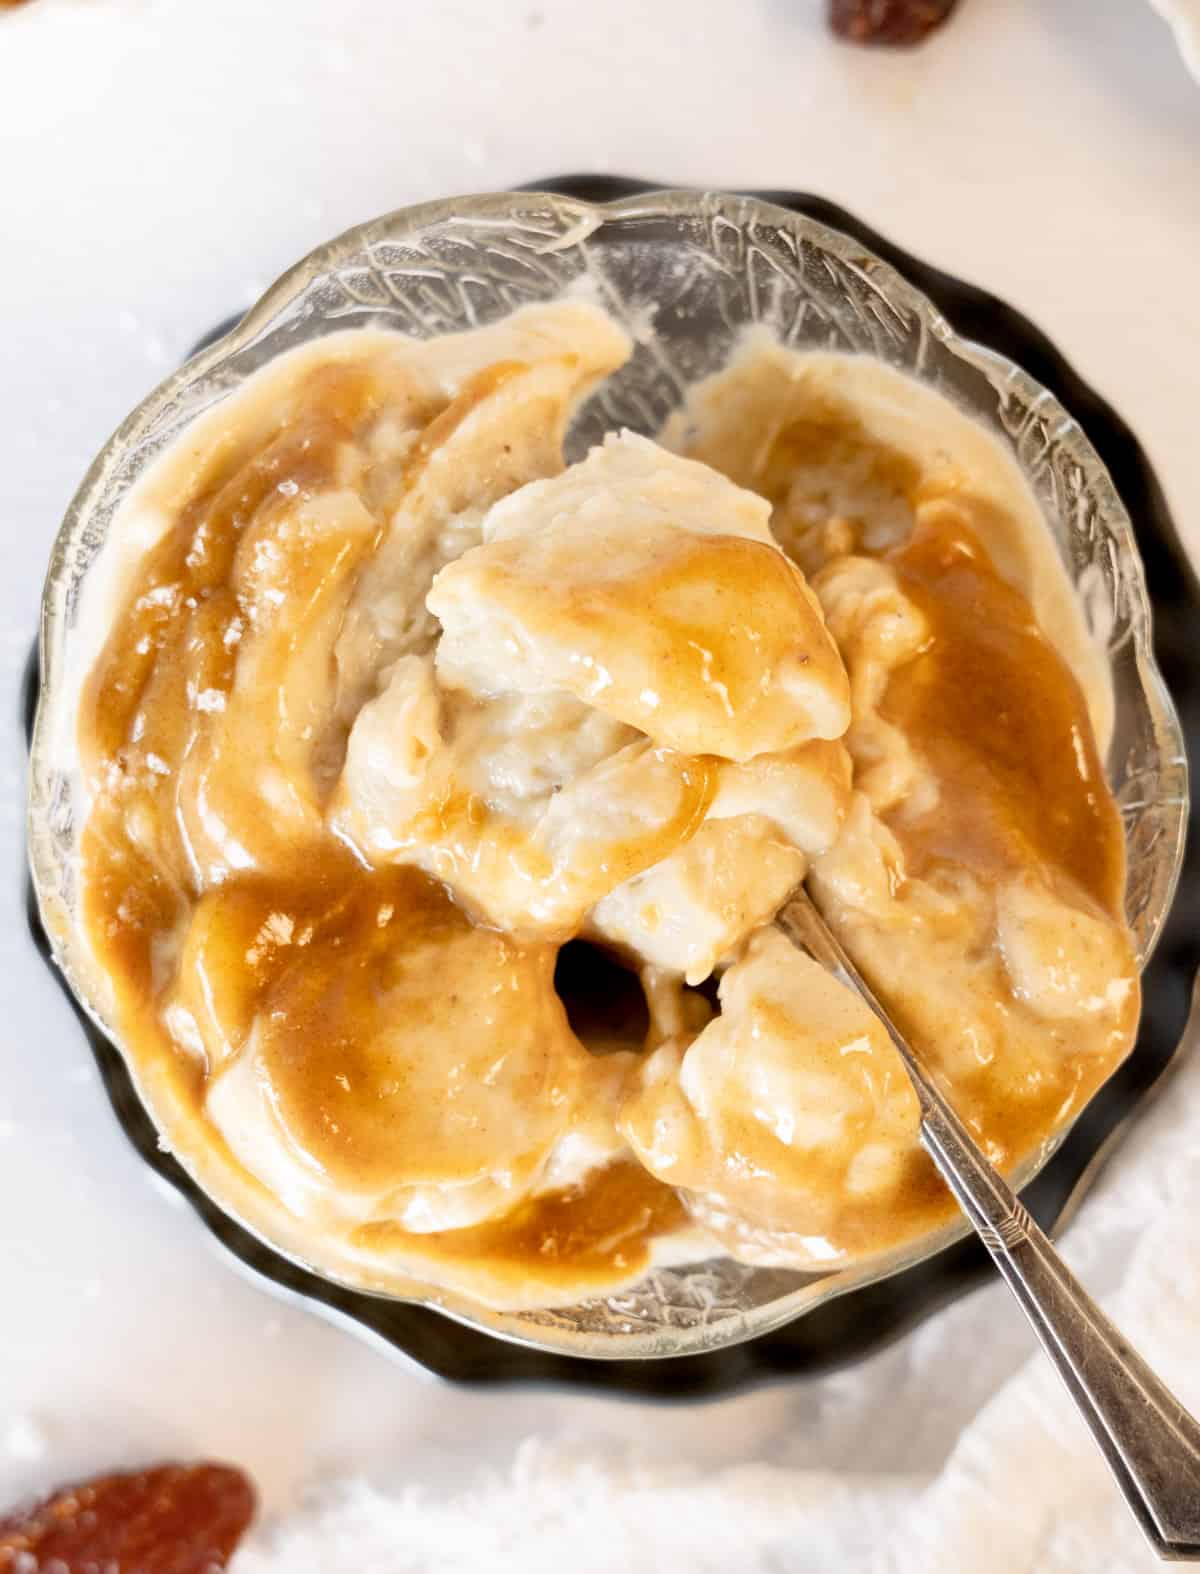 ice cream topped with caramel sauce